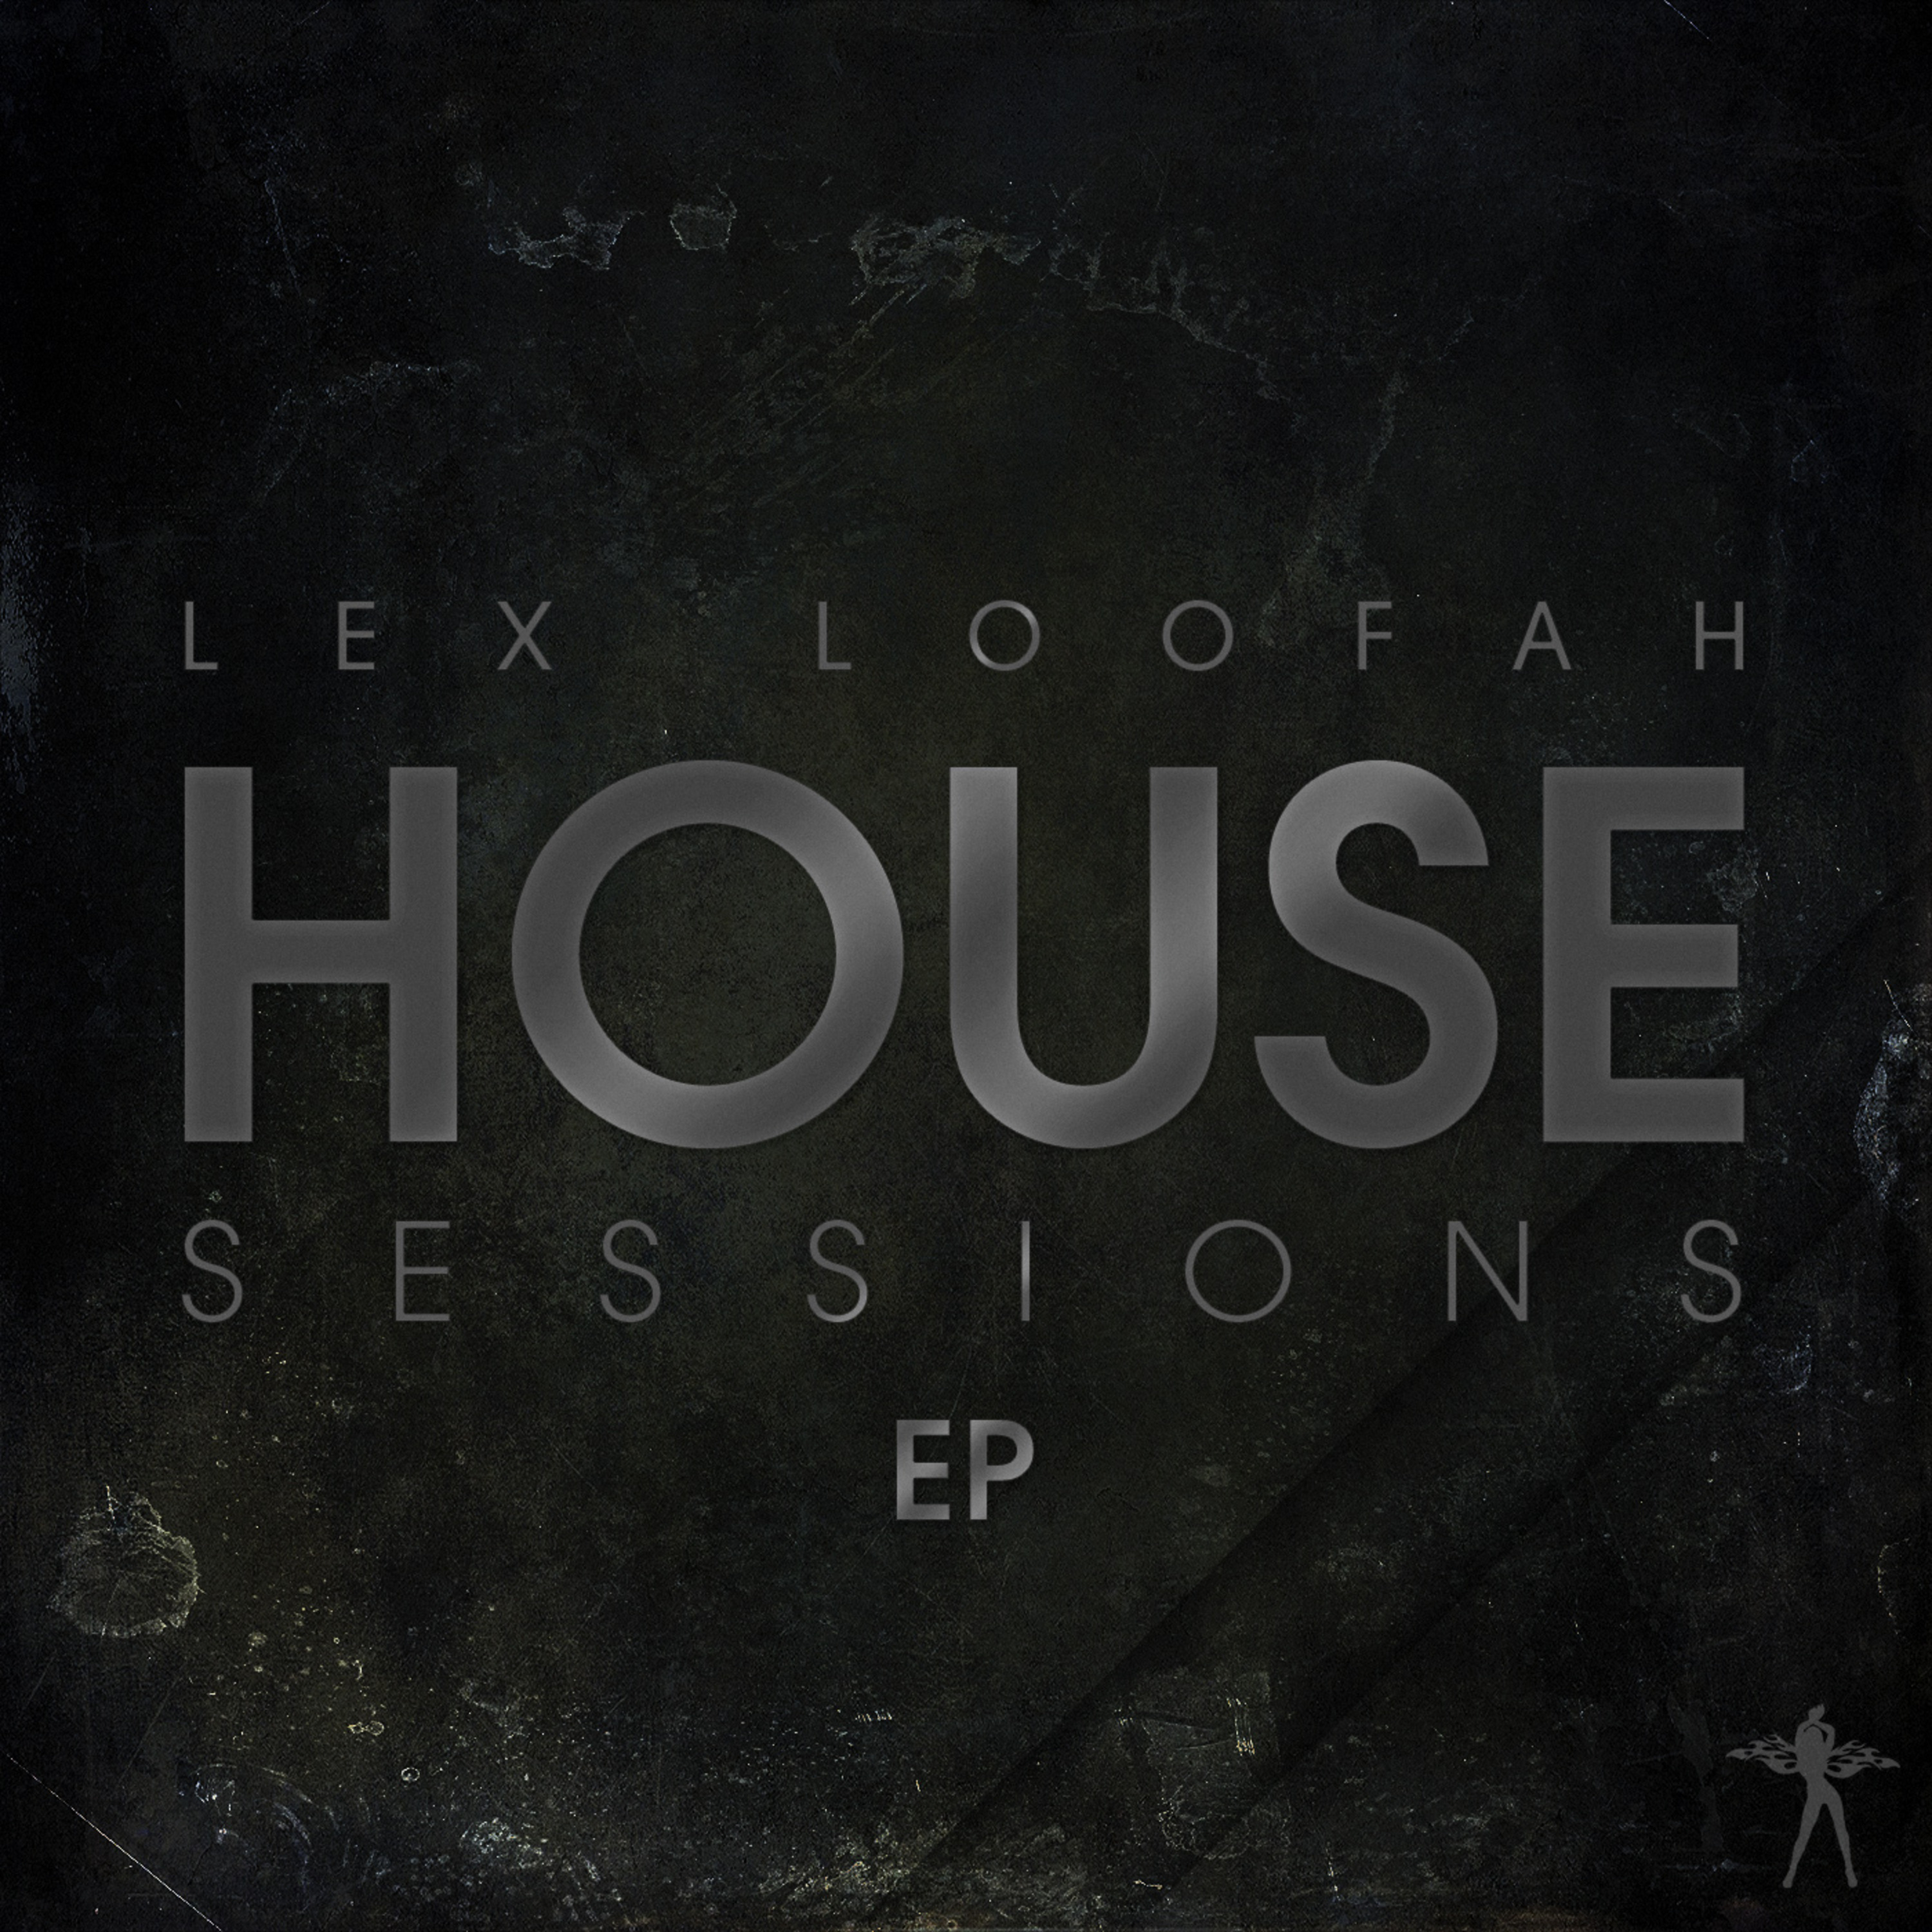 The House Sessions EP